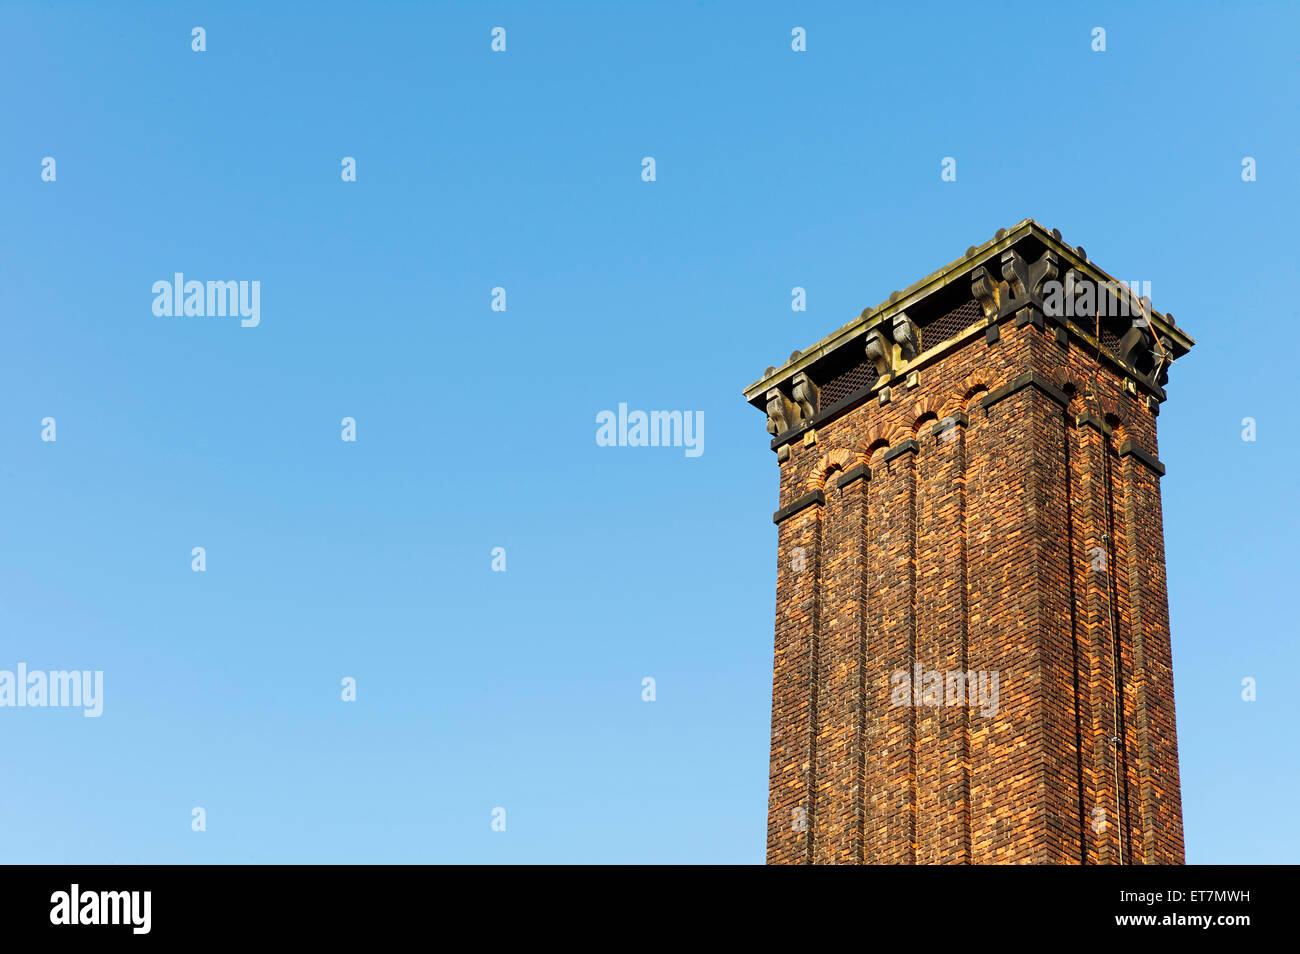 Chimney detail in Northern quarter, Manchester Stock Photo